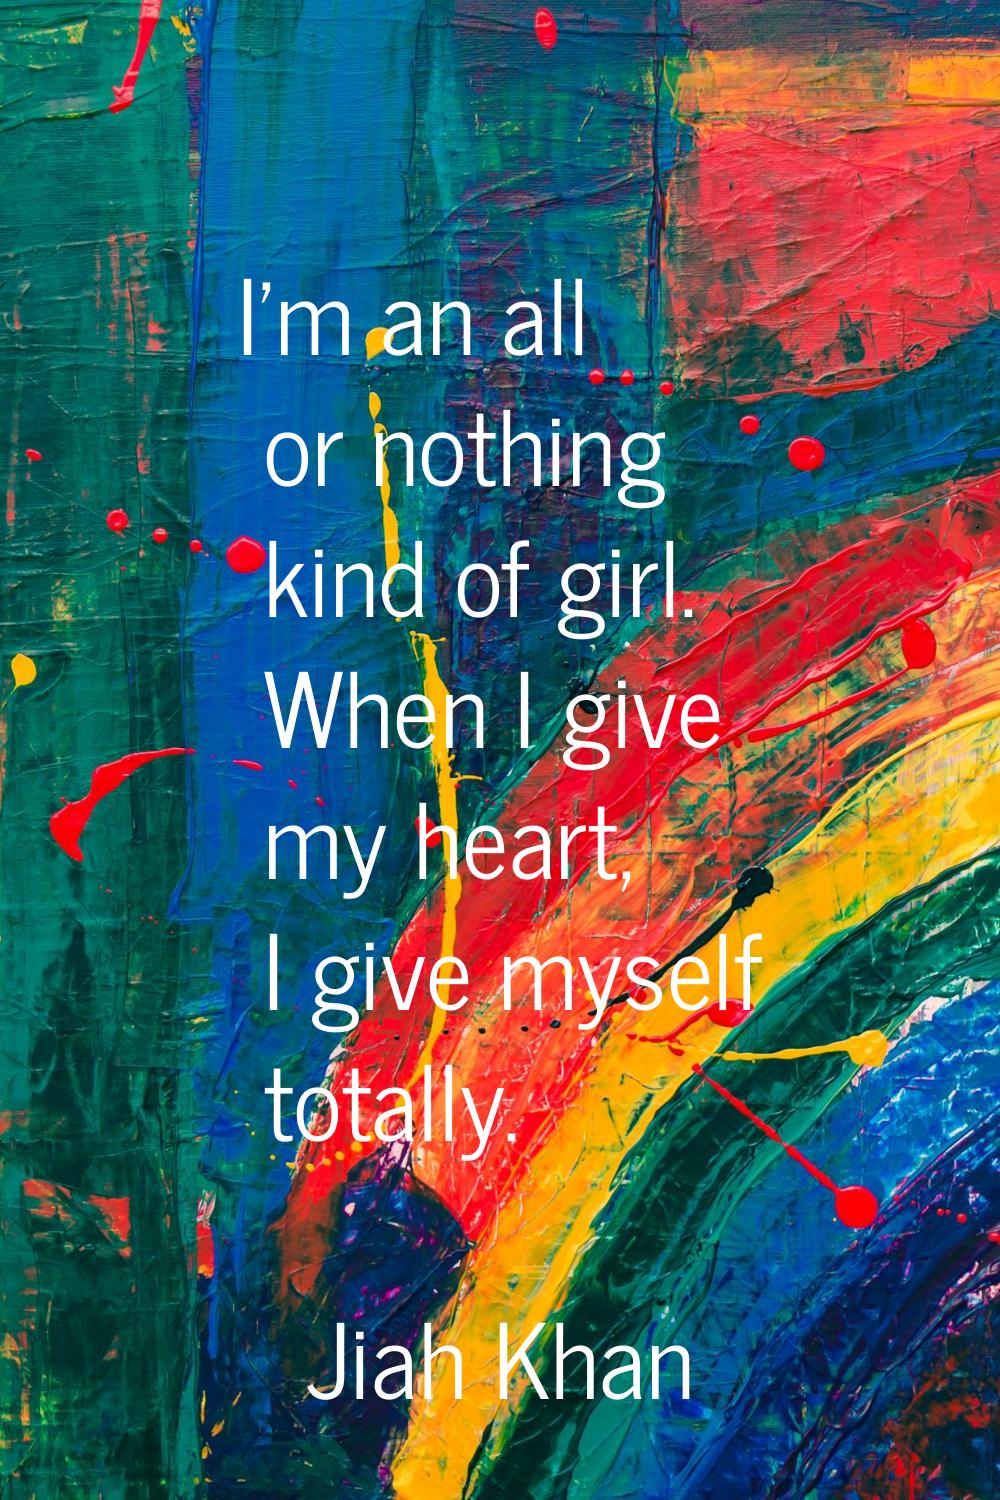 I'm an all or nothing kind of girl. When I give my heart, I give myself totally.